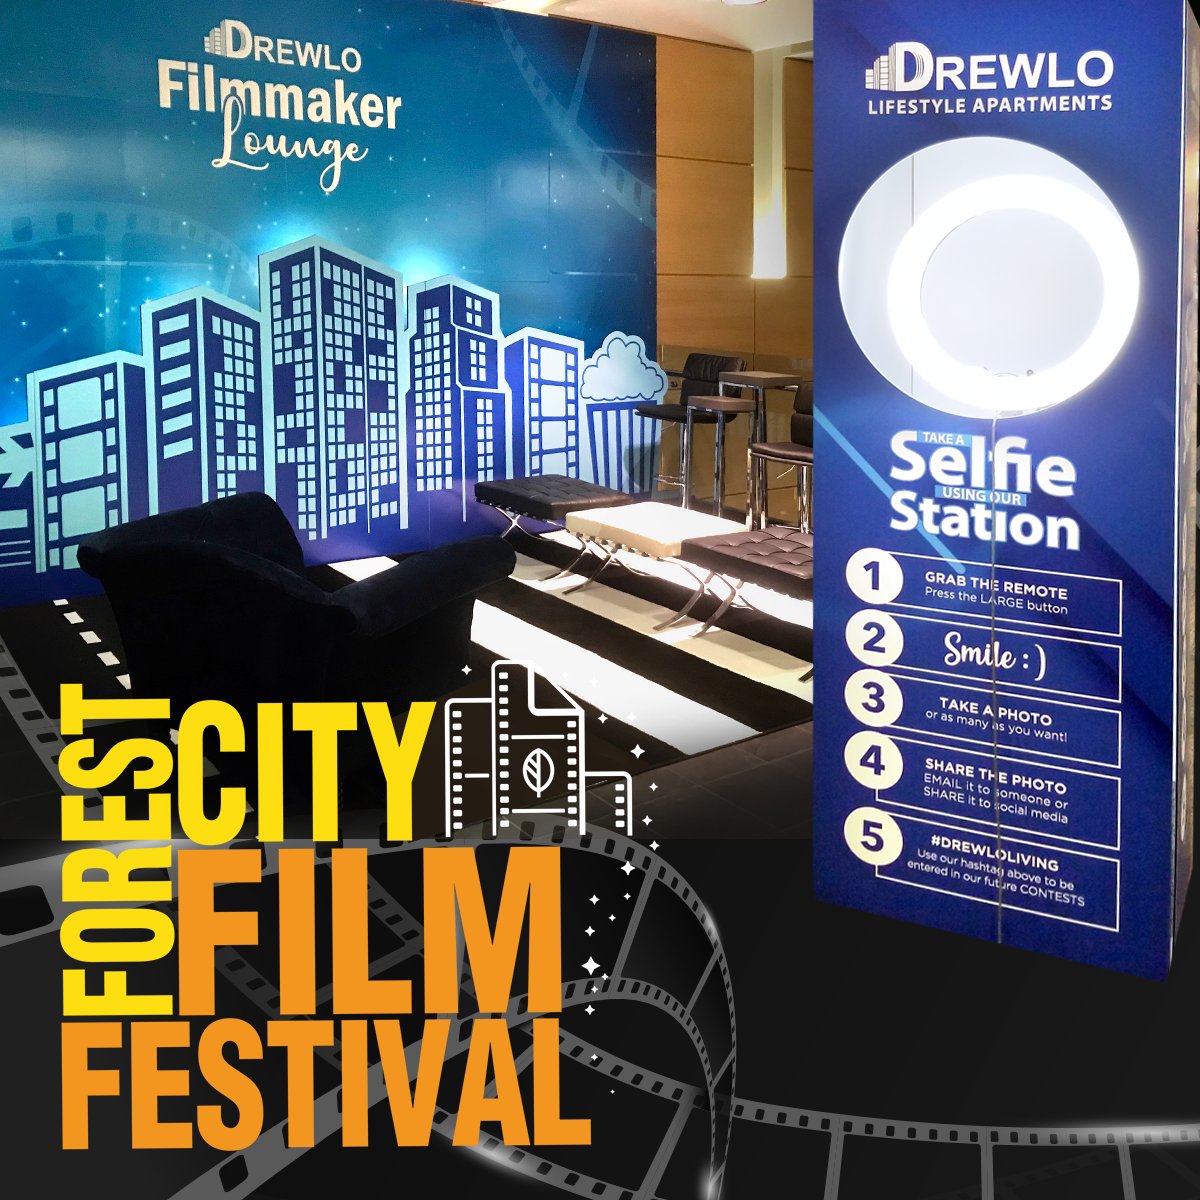 Drewlo Holdings is proud to be a sponsor of the 2019 Forest City Film Festival. Come check out our Filmmaker Lounge where you can meet the cast and crew after their screenings! 

See you there! 

#FCFF2019 #LdnOnt #GivingBack #LdnontArts

@londonlibrary
@FCfilmfestival